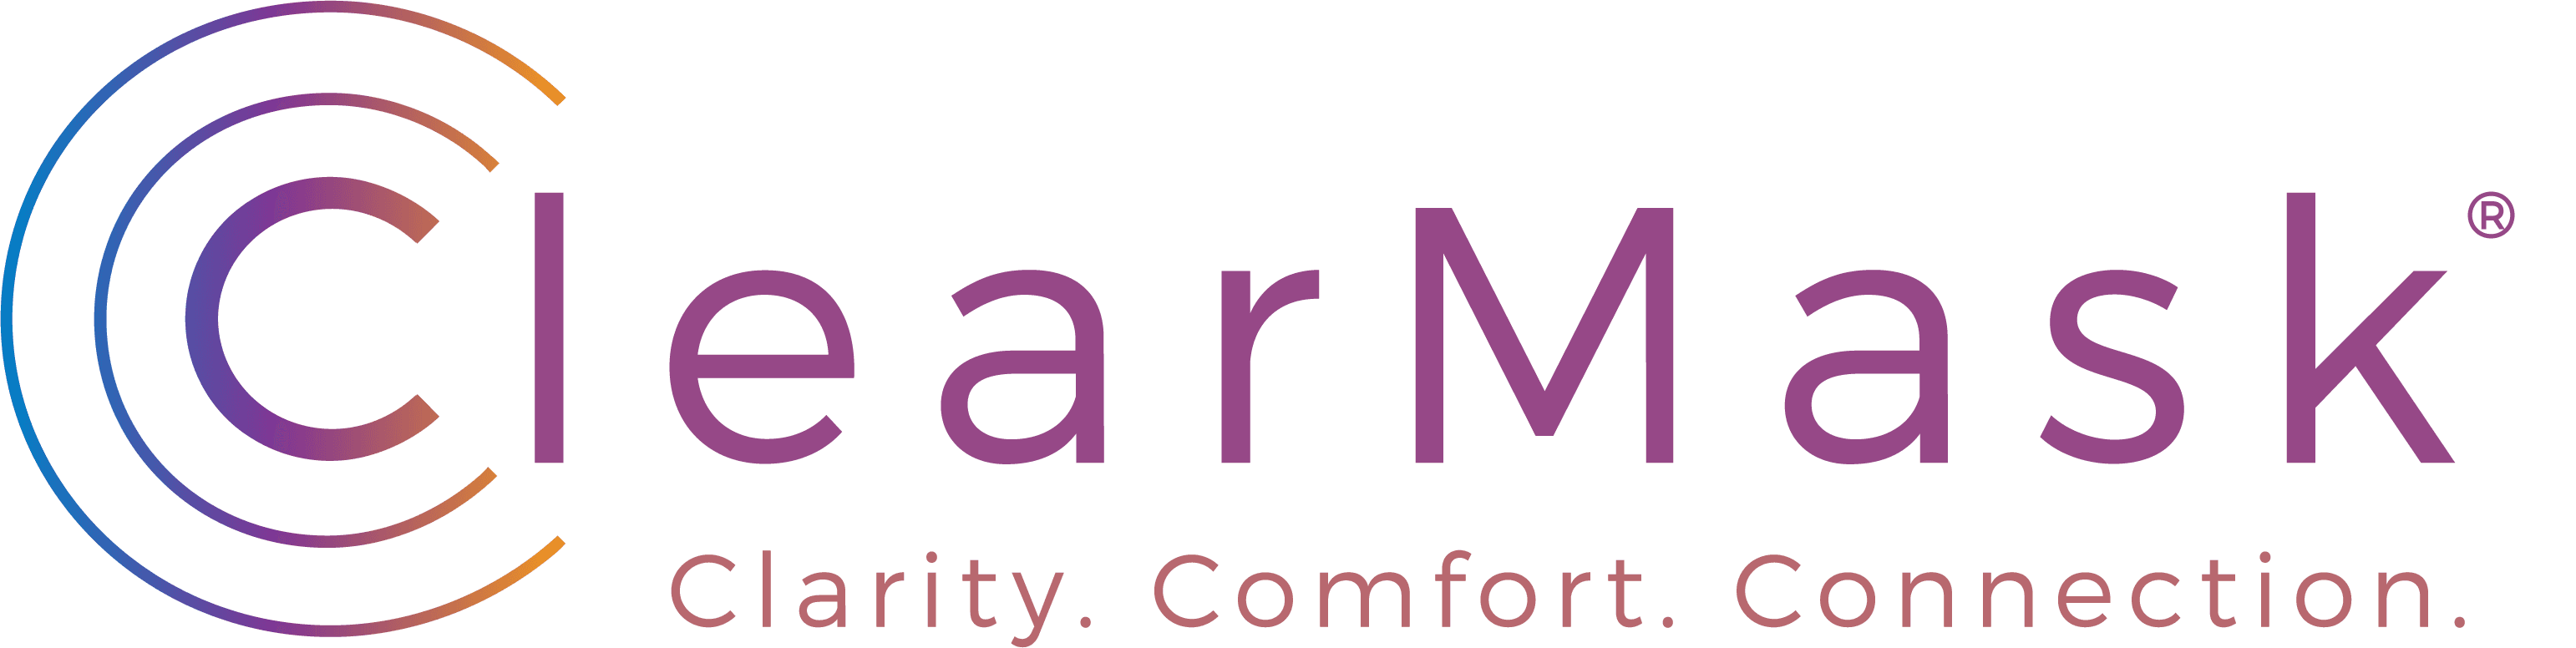 ClearMask logo: Clarity. Comfort. Connection.